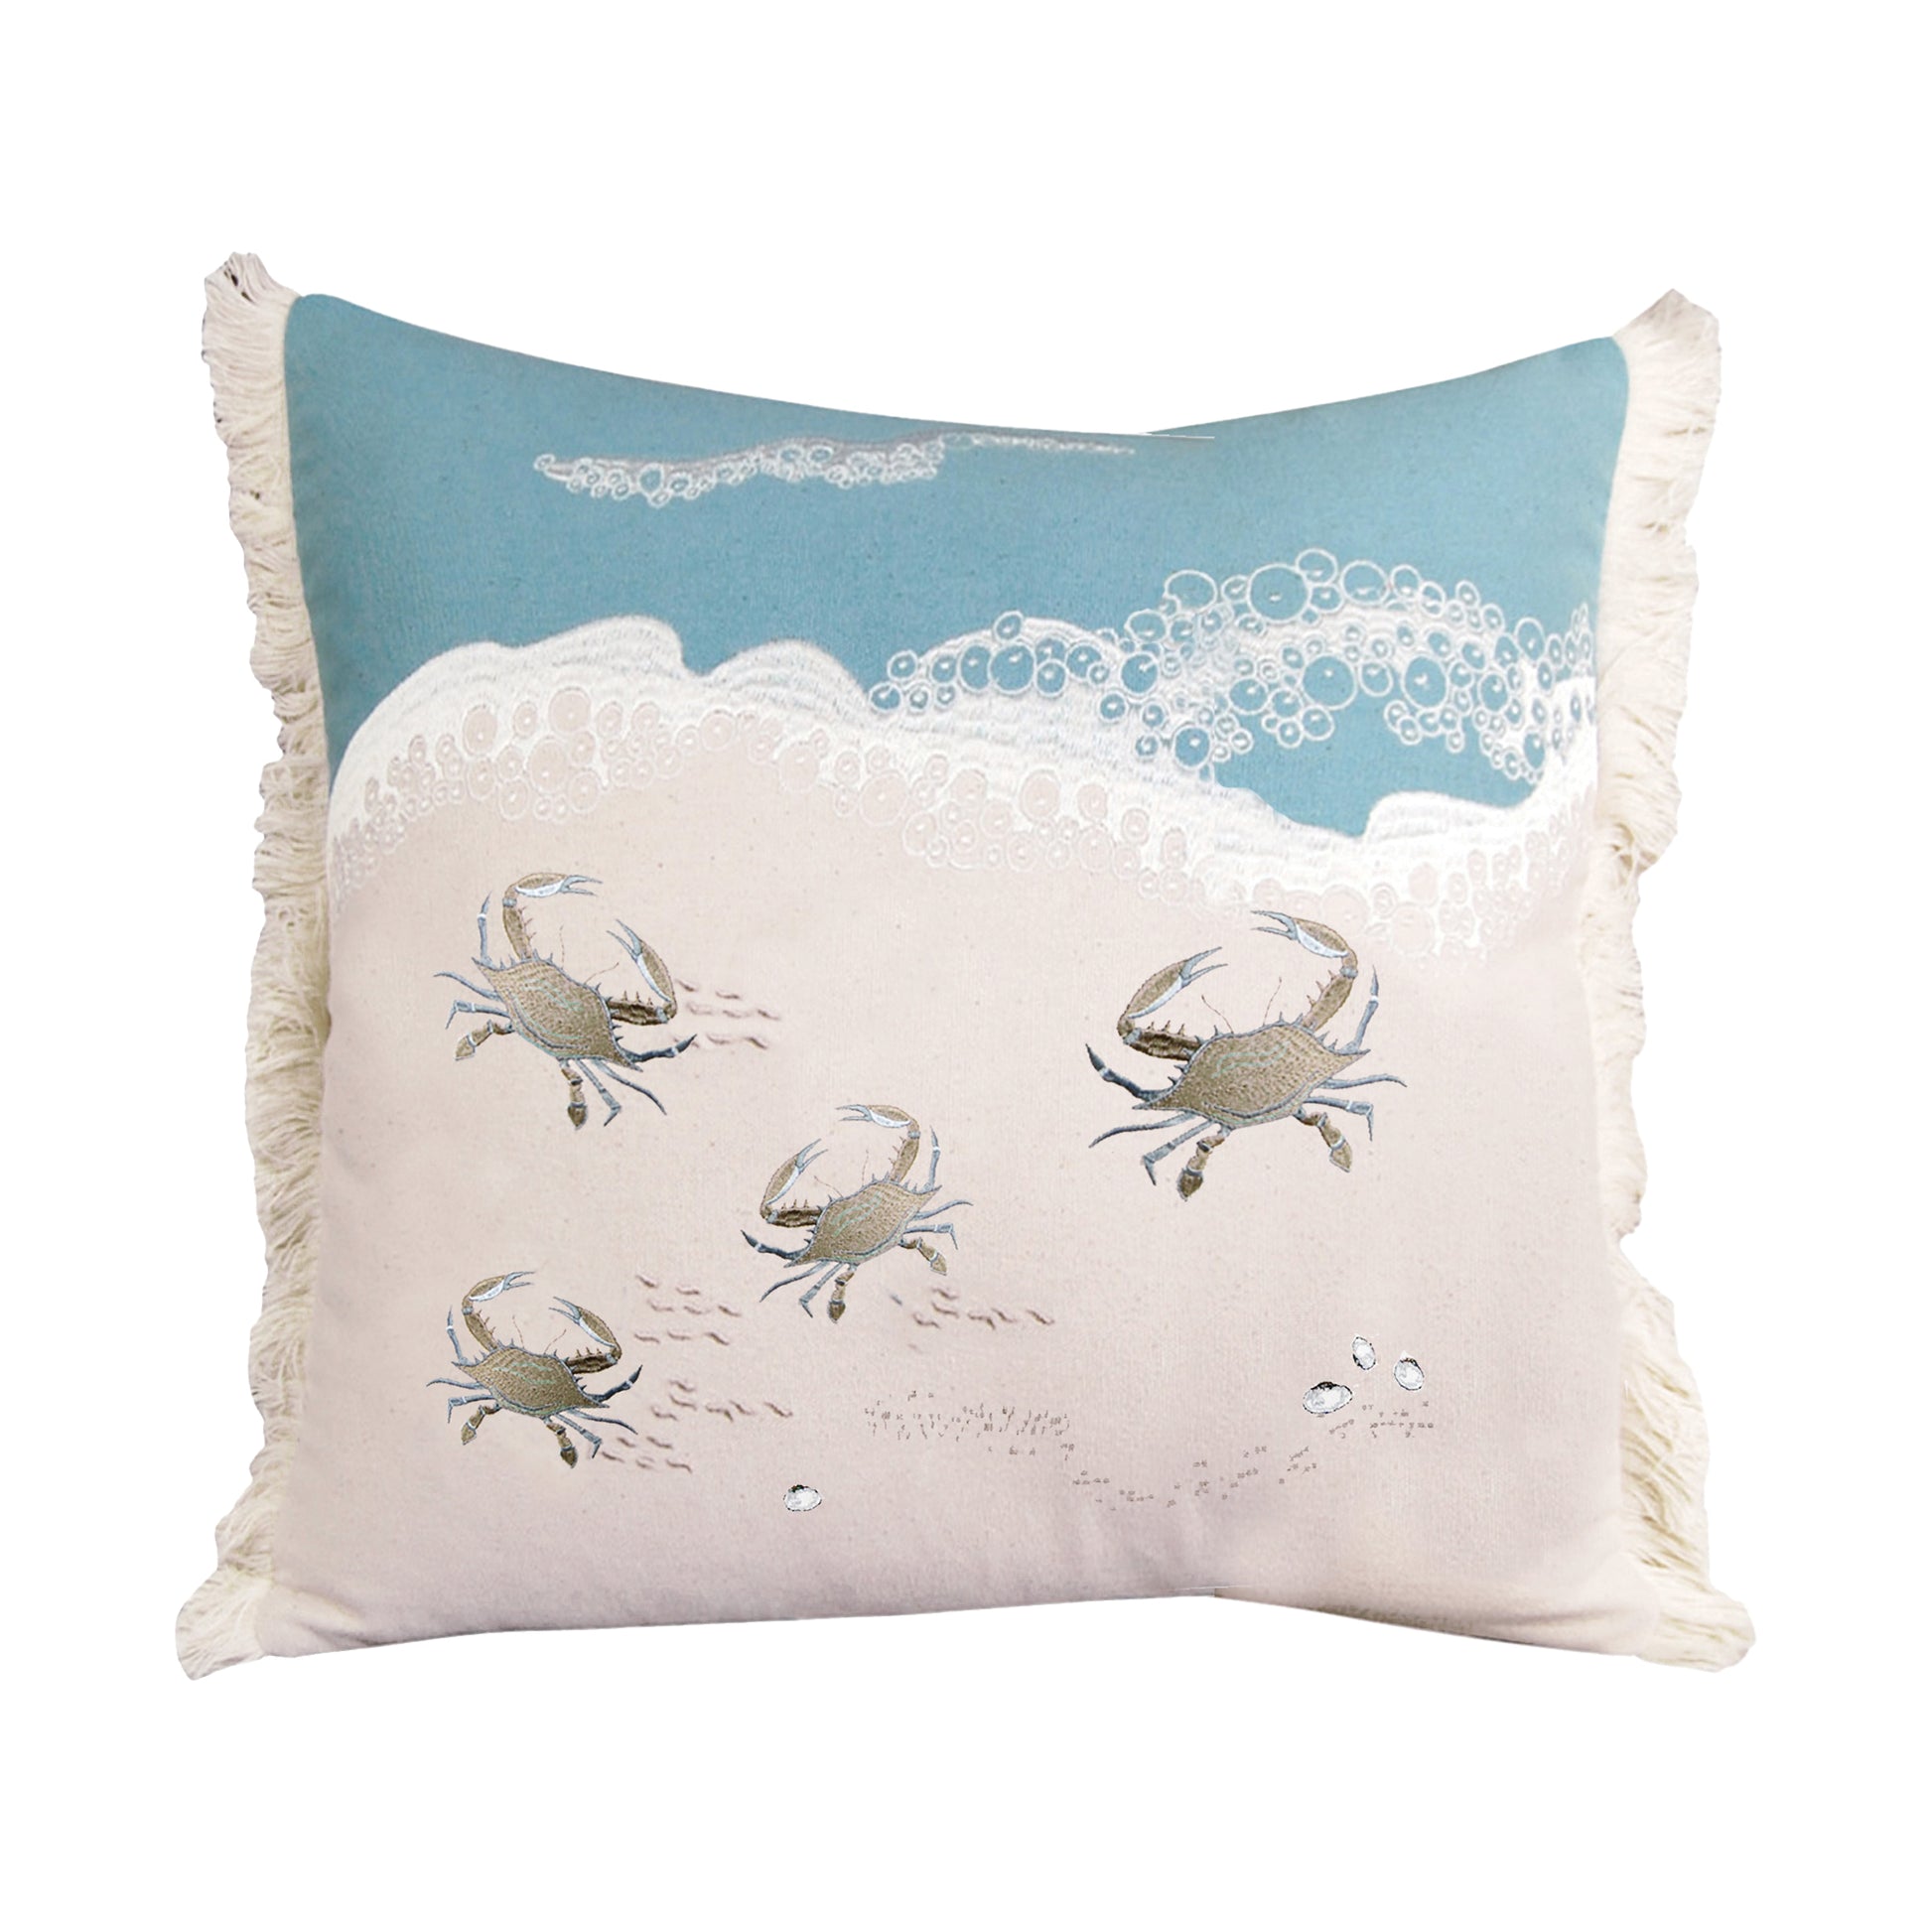 Crab with Waves Embroidered Pillow